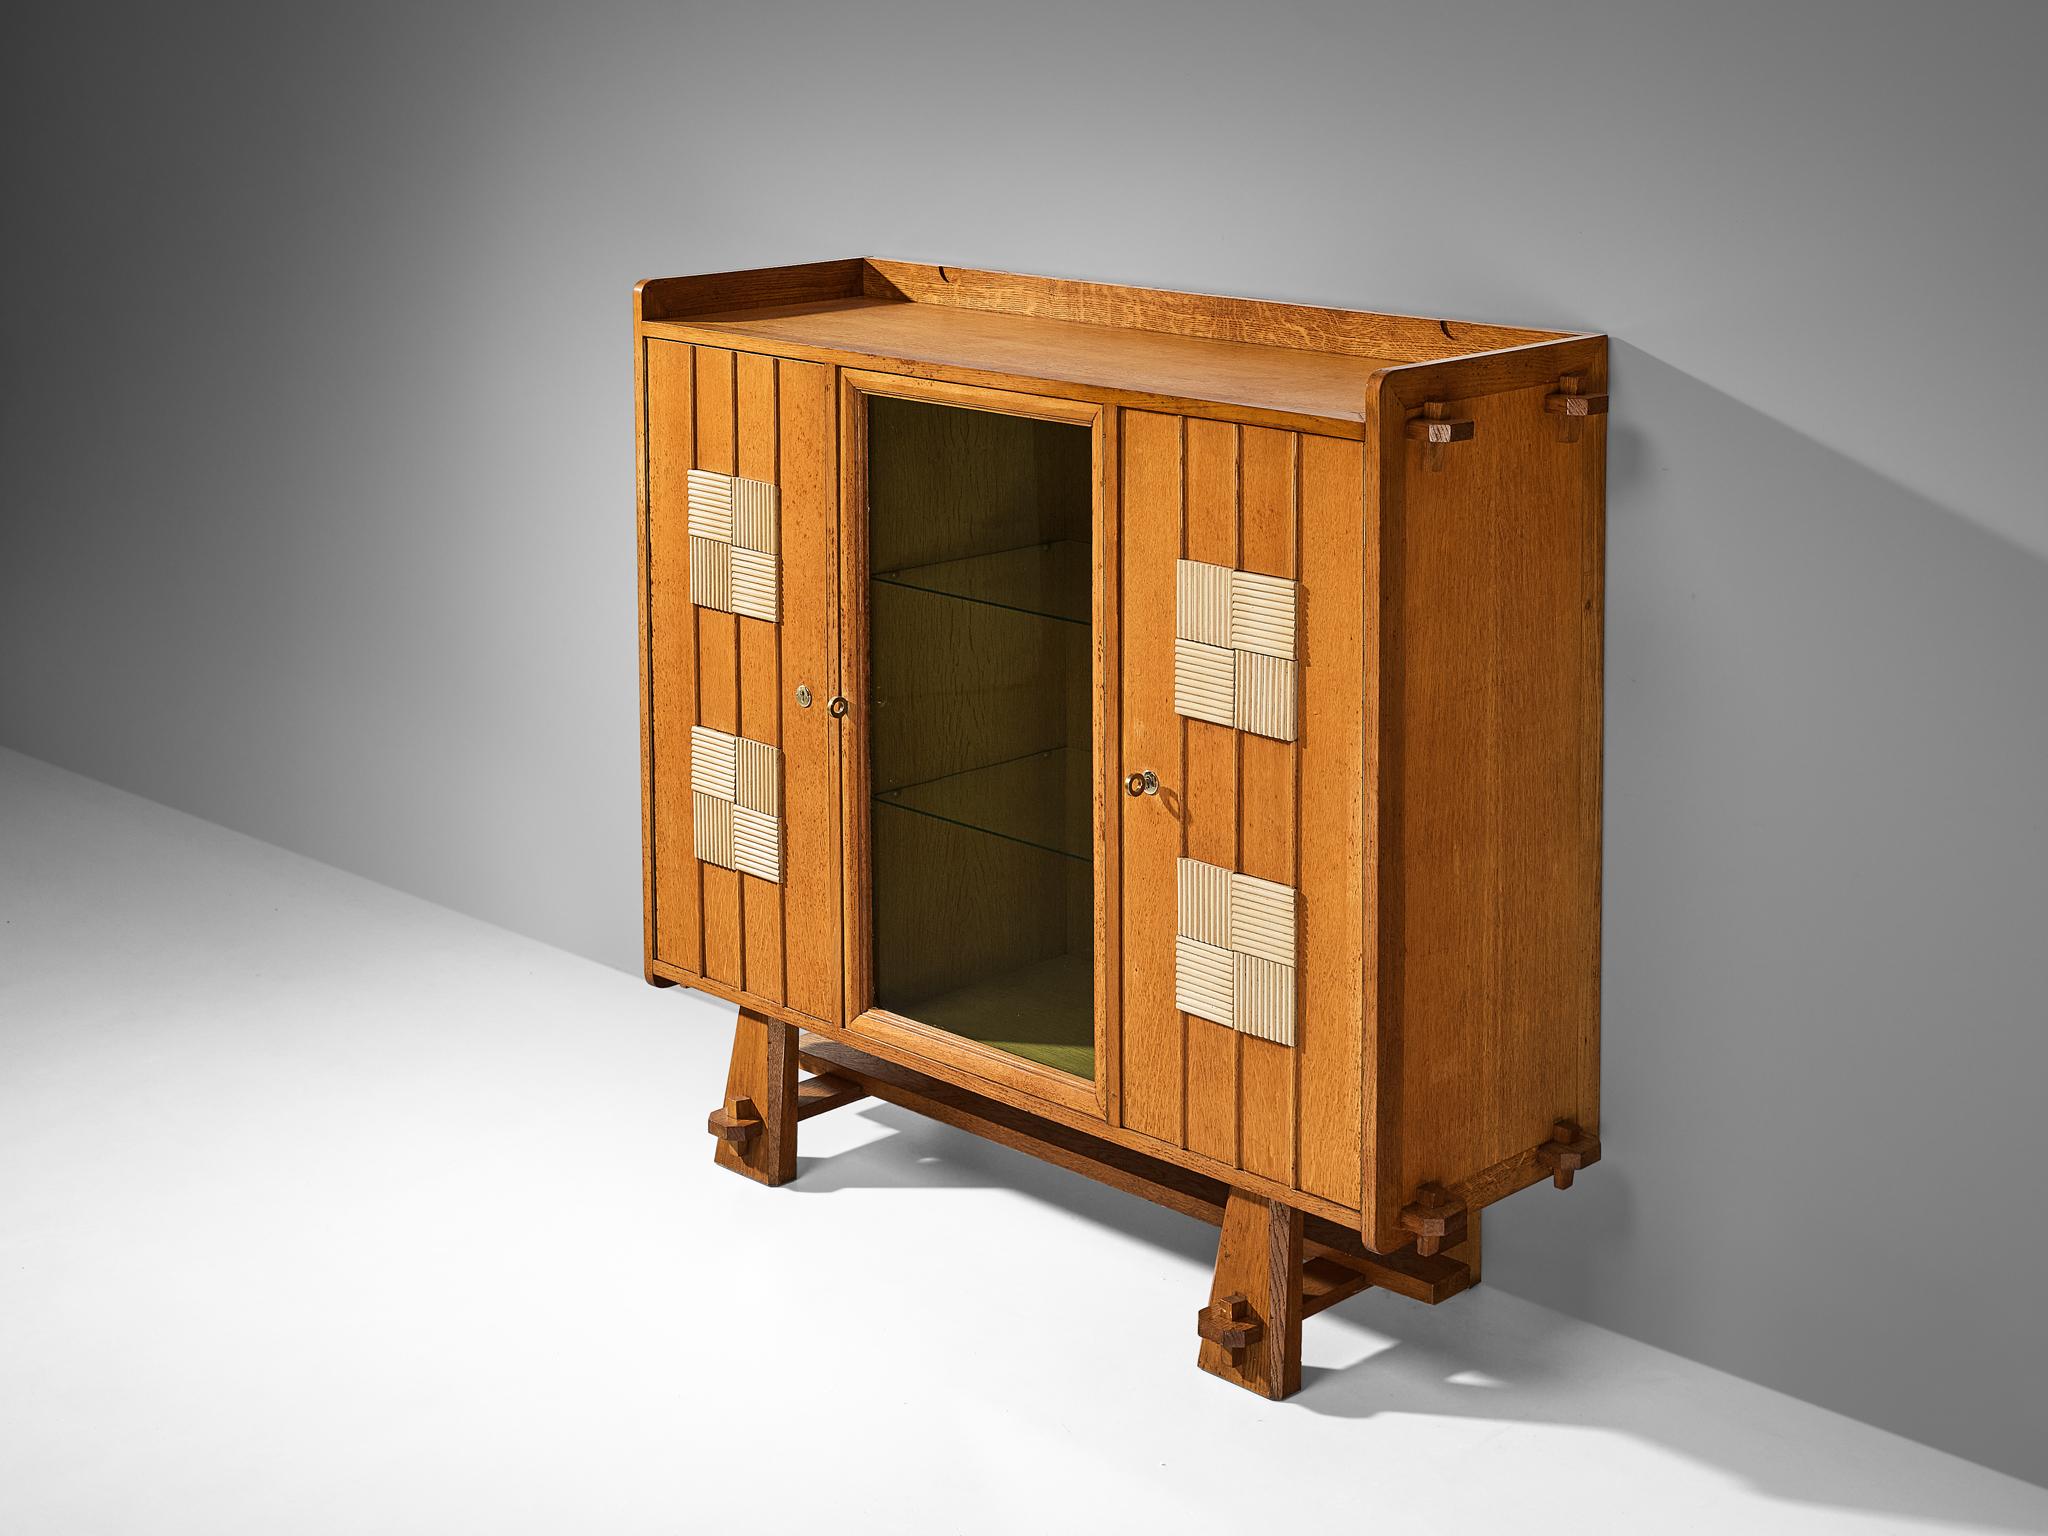 Cupboard, oak, glass, brass, aluminum, Belgium, 1970s. 

This very expressive cupboard features a clear rhythm and flow that has been achieved through a thoughtful layout that is perfectly balanced. The off-white lacquered squares with relief